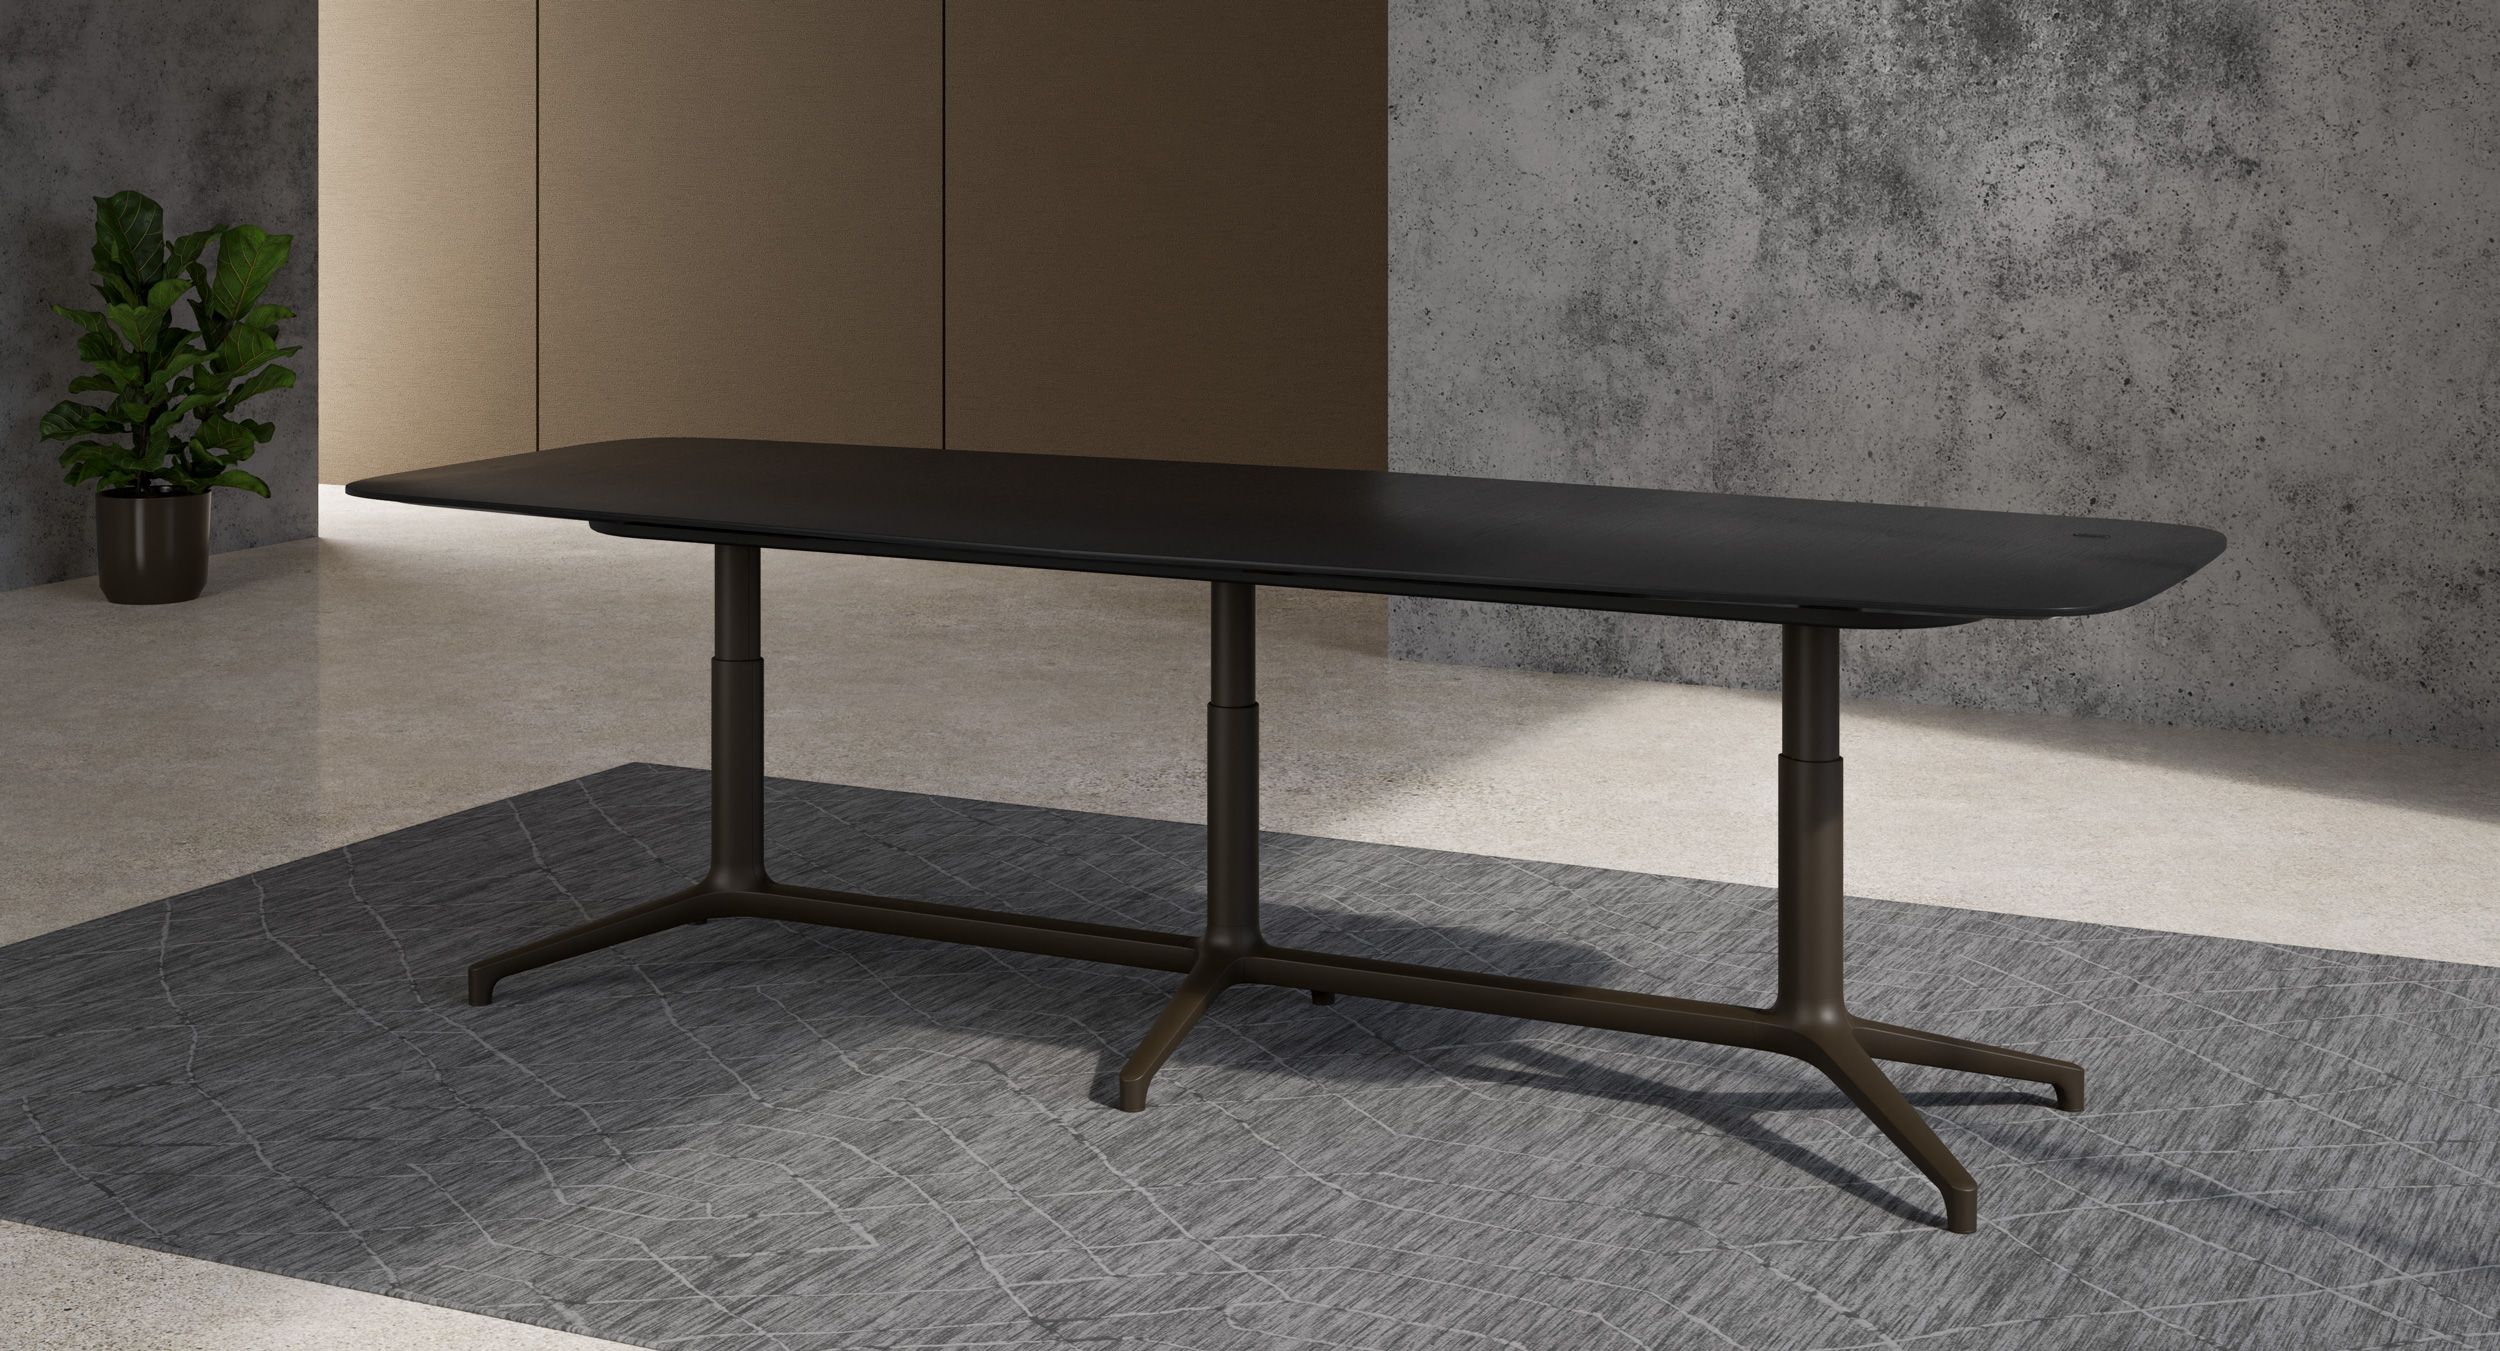 Helm conference tables effortlessly transform from conference table to bar height to maximize space utilization.